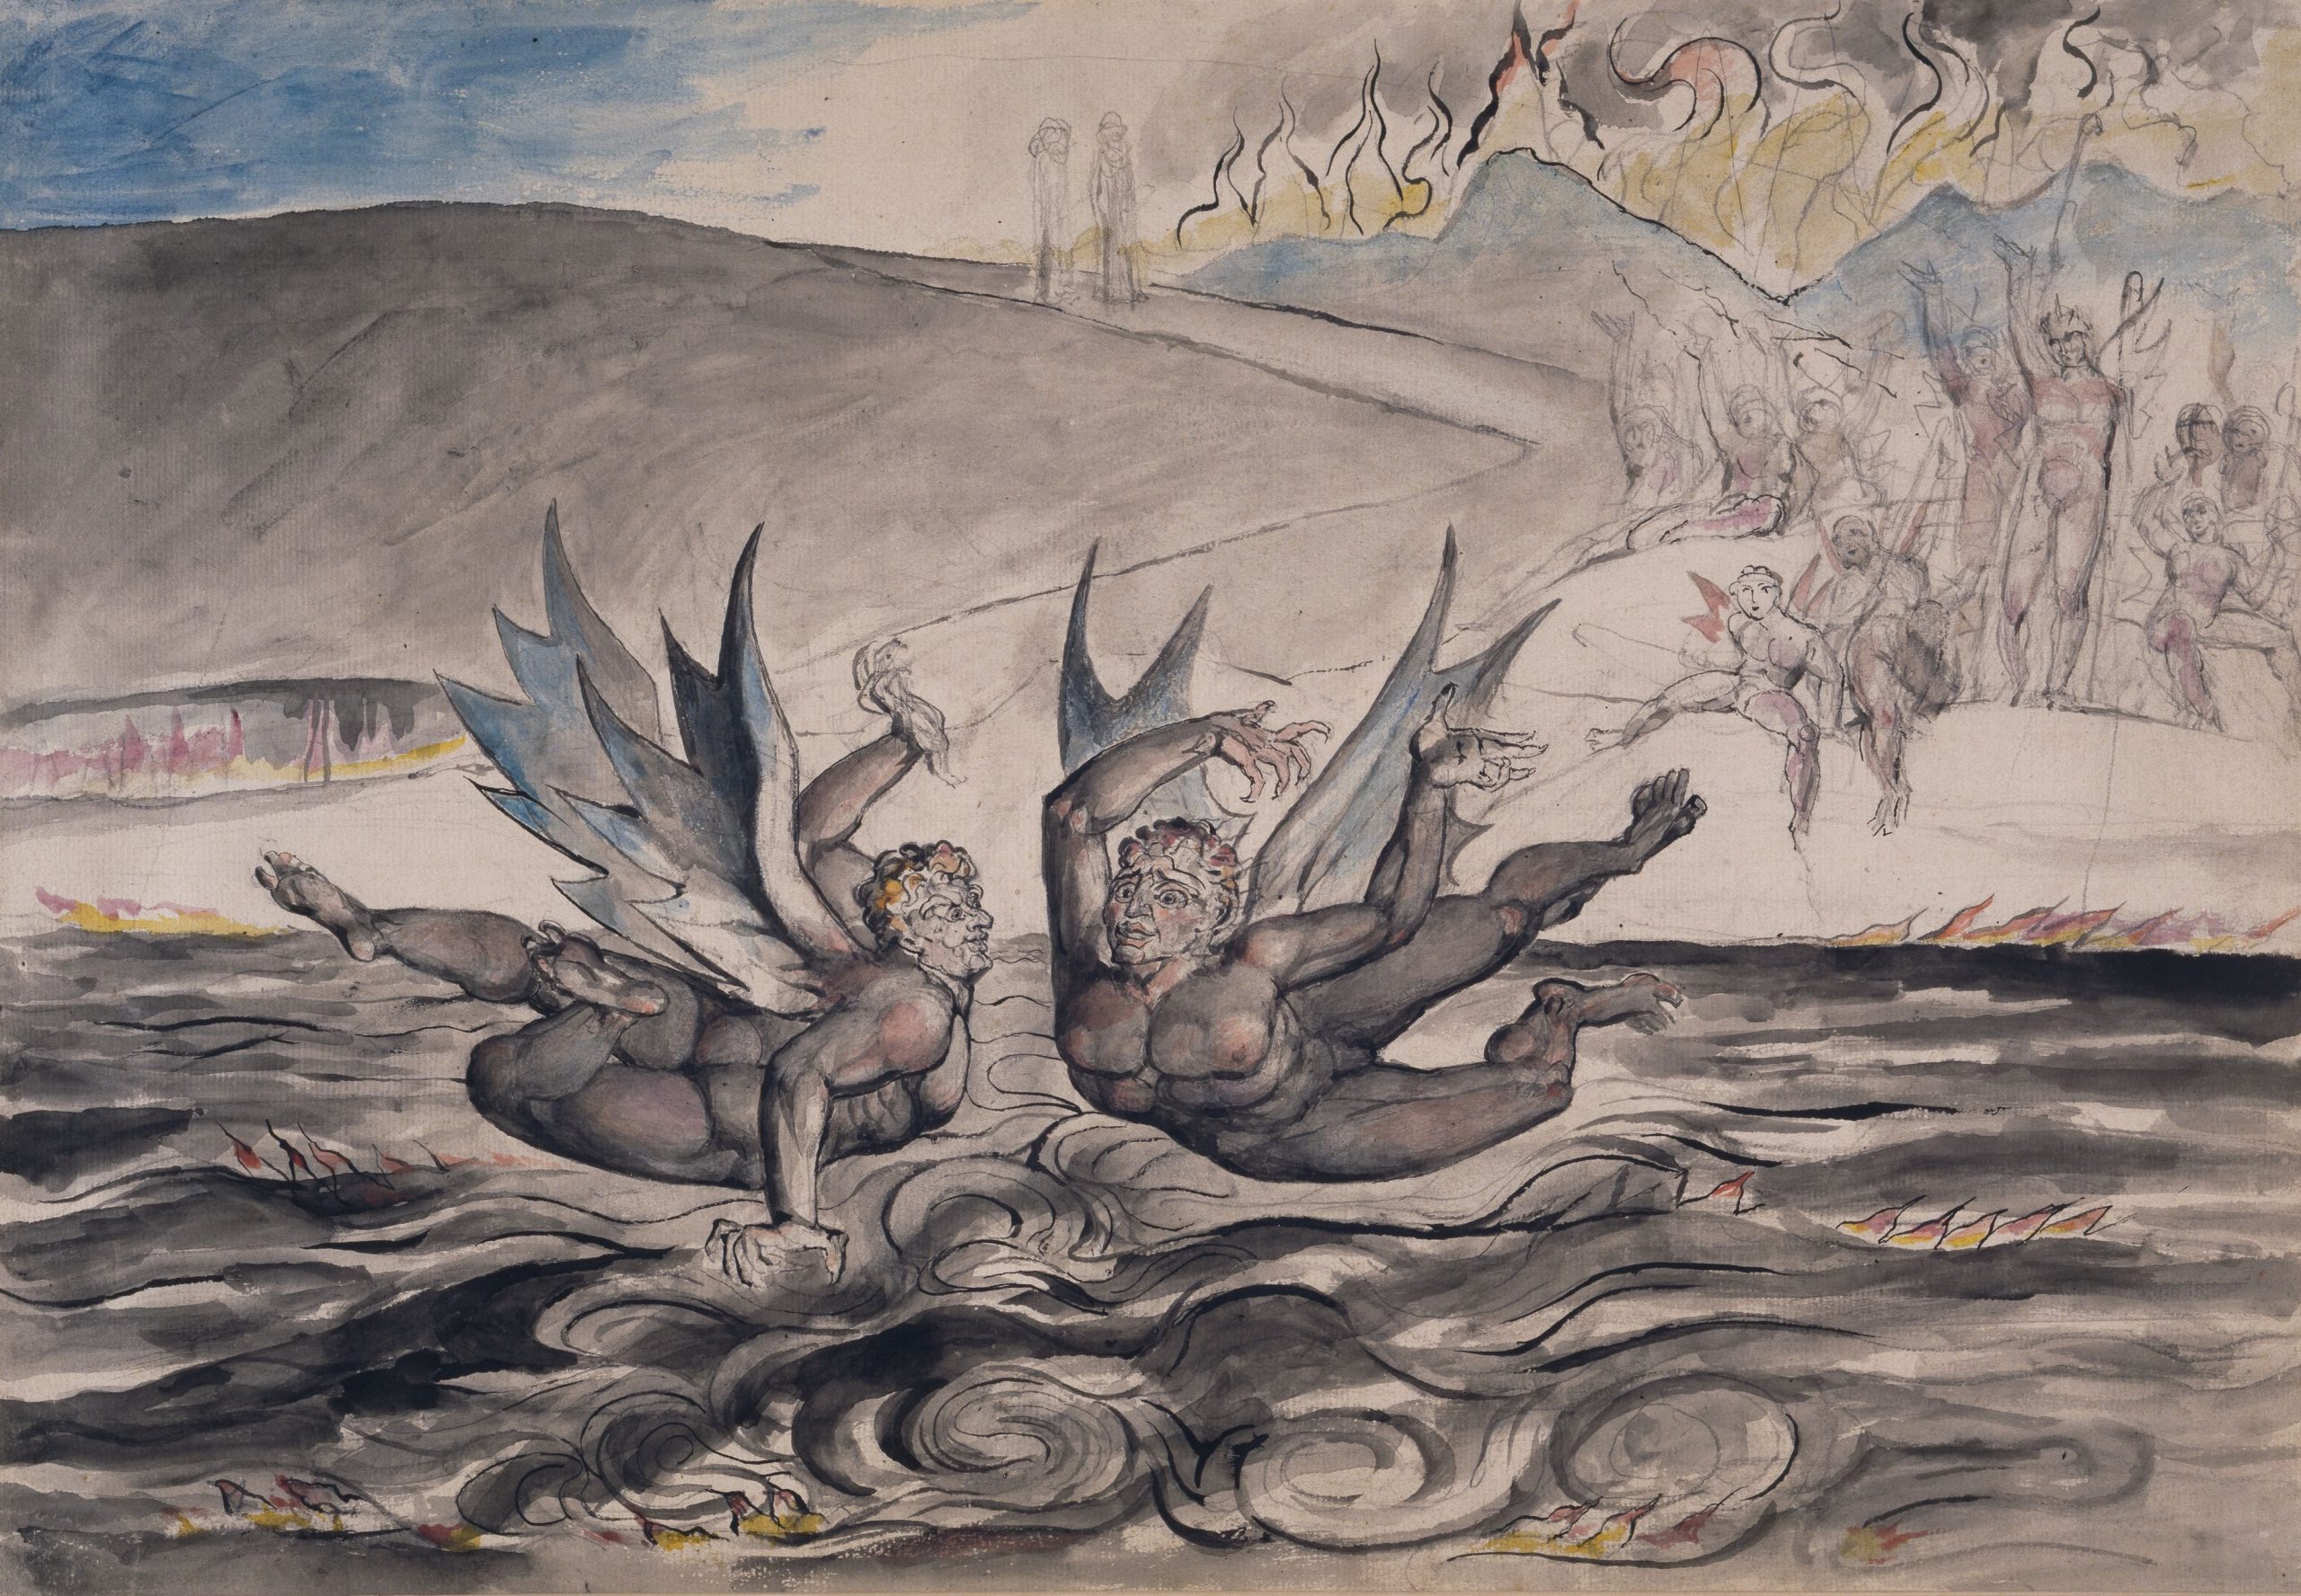 1919P3 The Baffled Devils Fighting, 1824-27 Watercolour with pen and ink over pencil Artist: William Blake (d.1827) from BMAG Digital Image Resource.